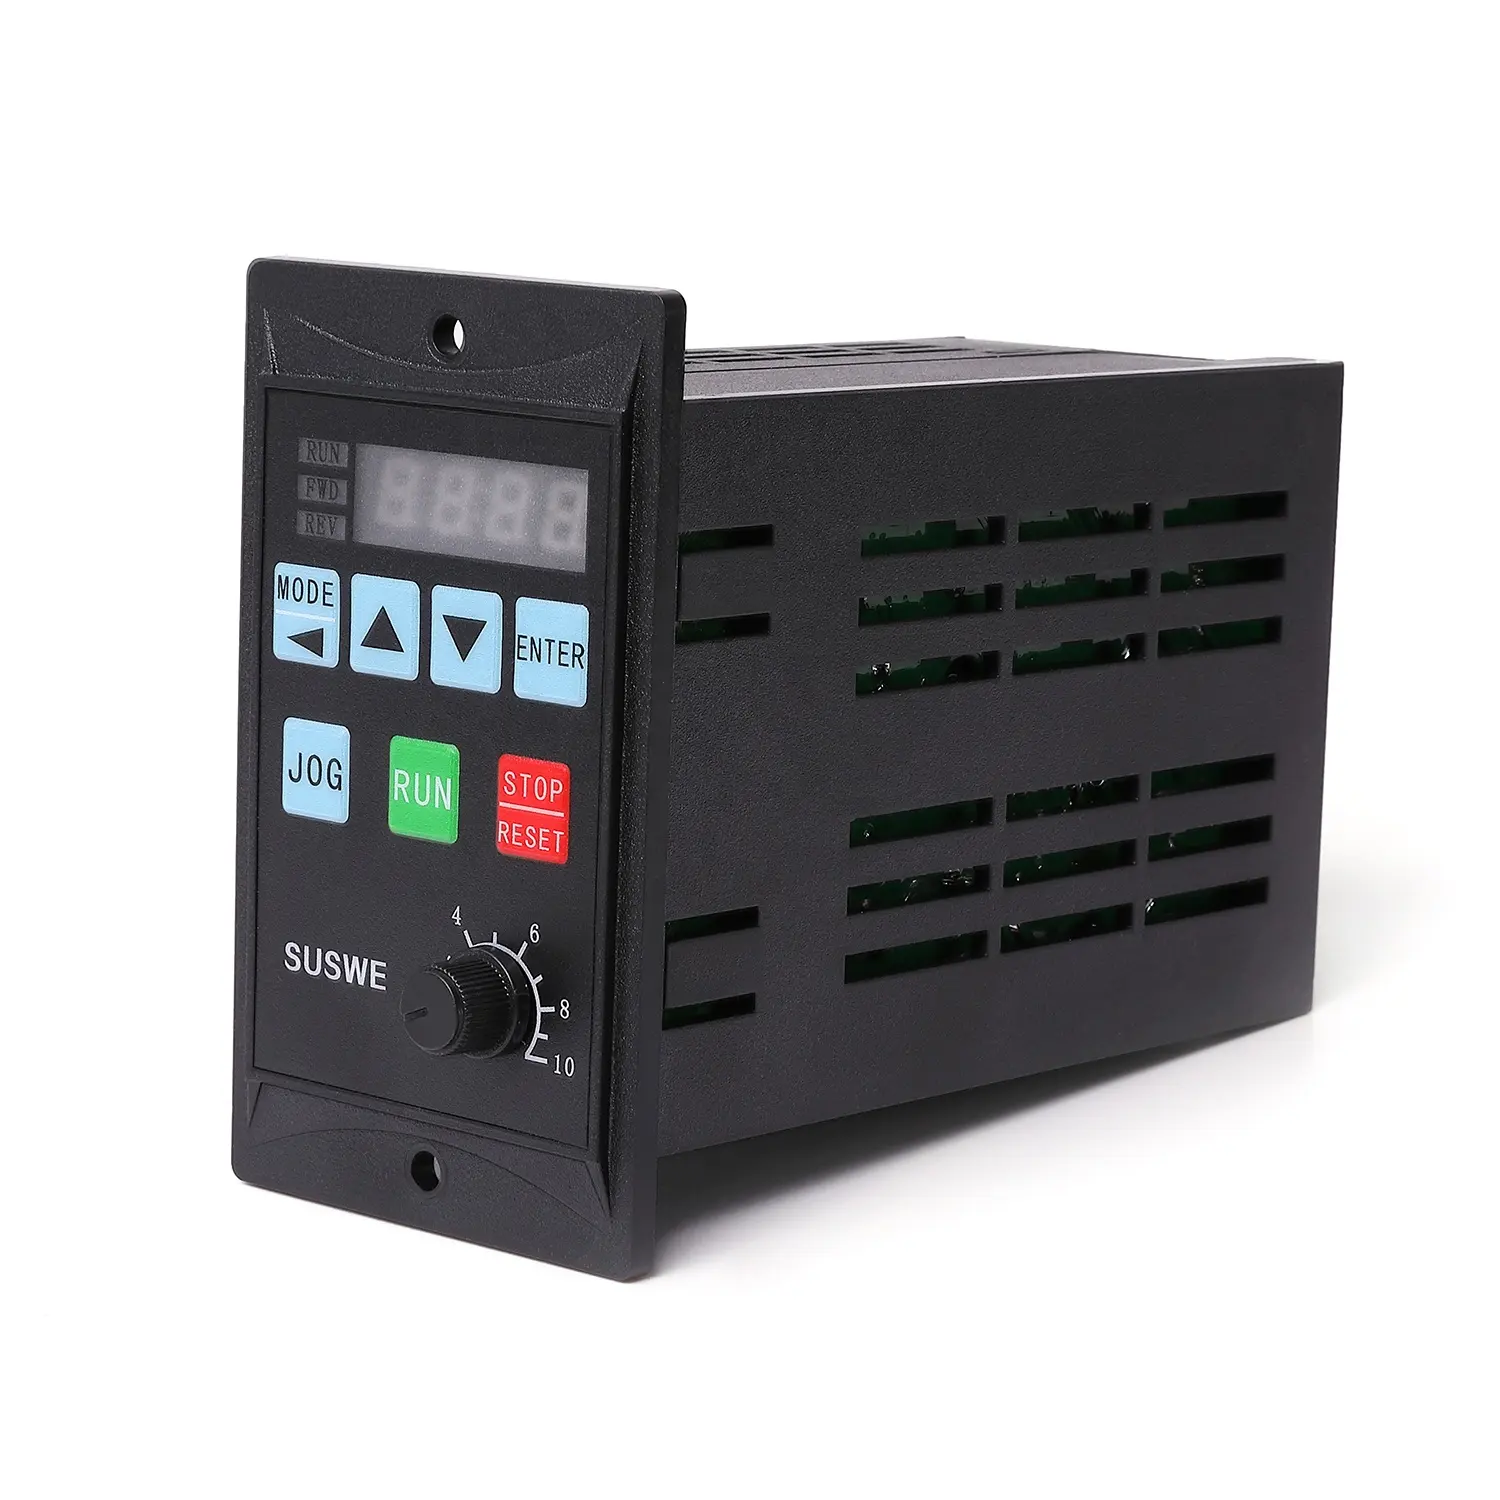 NEW Factory outlet Variable Frequency Drive converter 0.75kw 1.5kw 2.2kw 220v AC Light load vfd